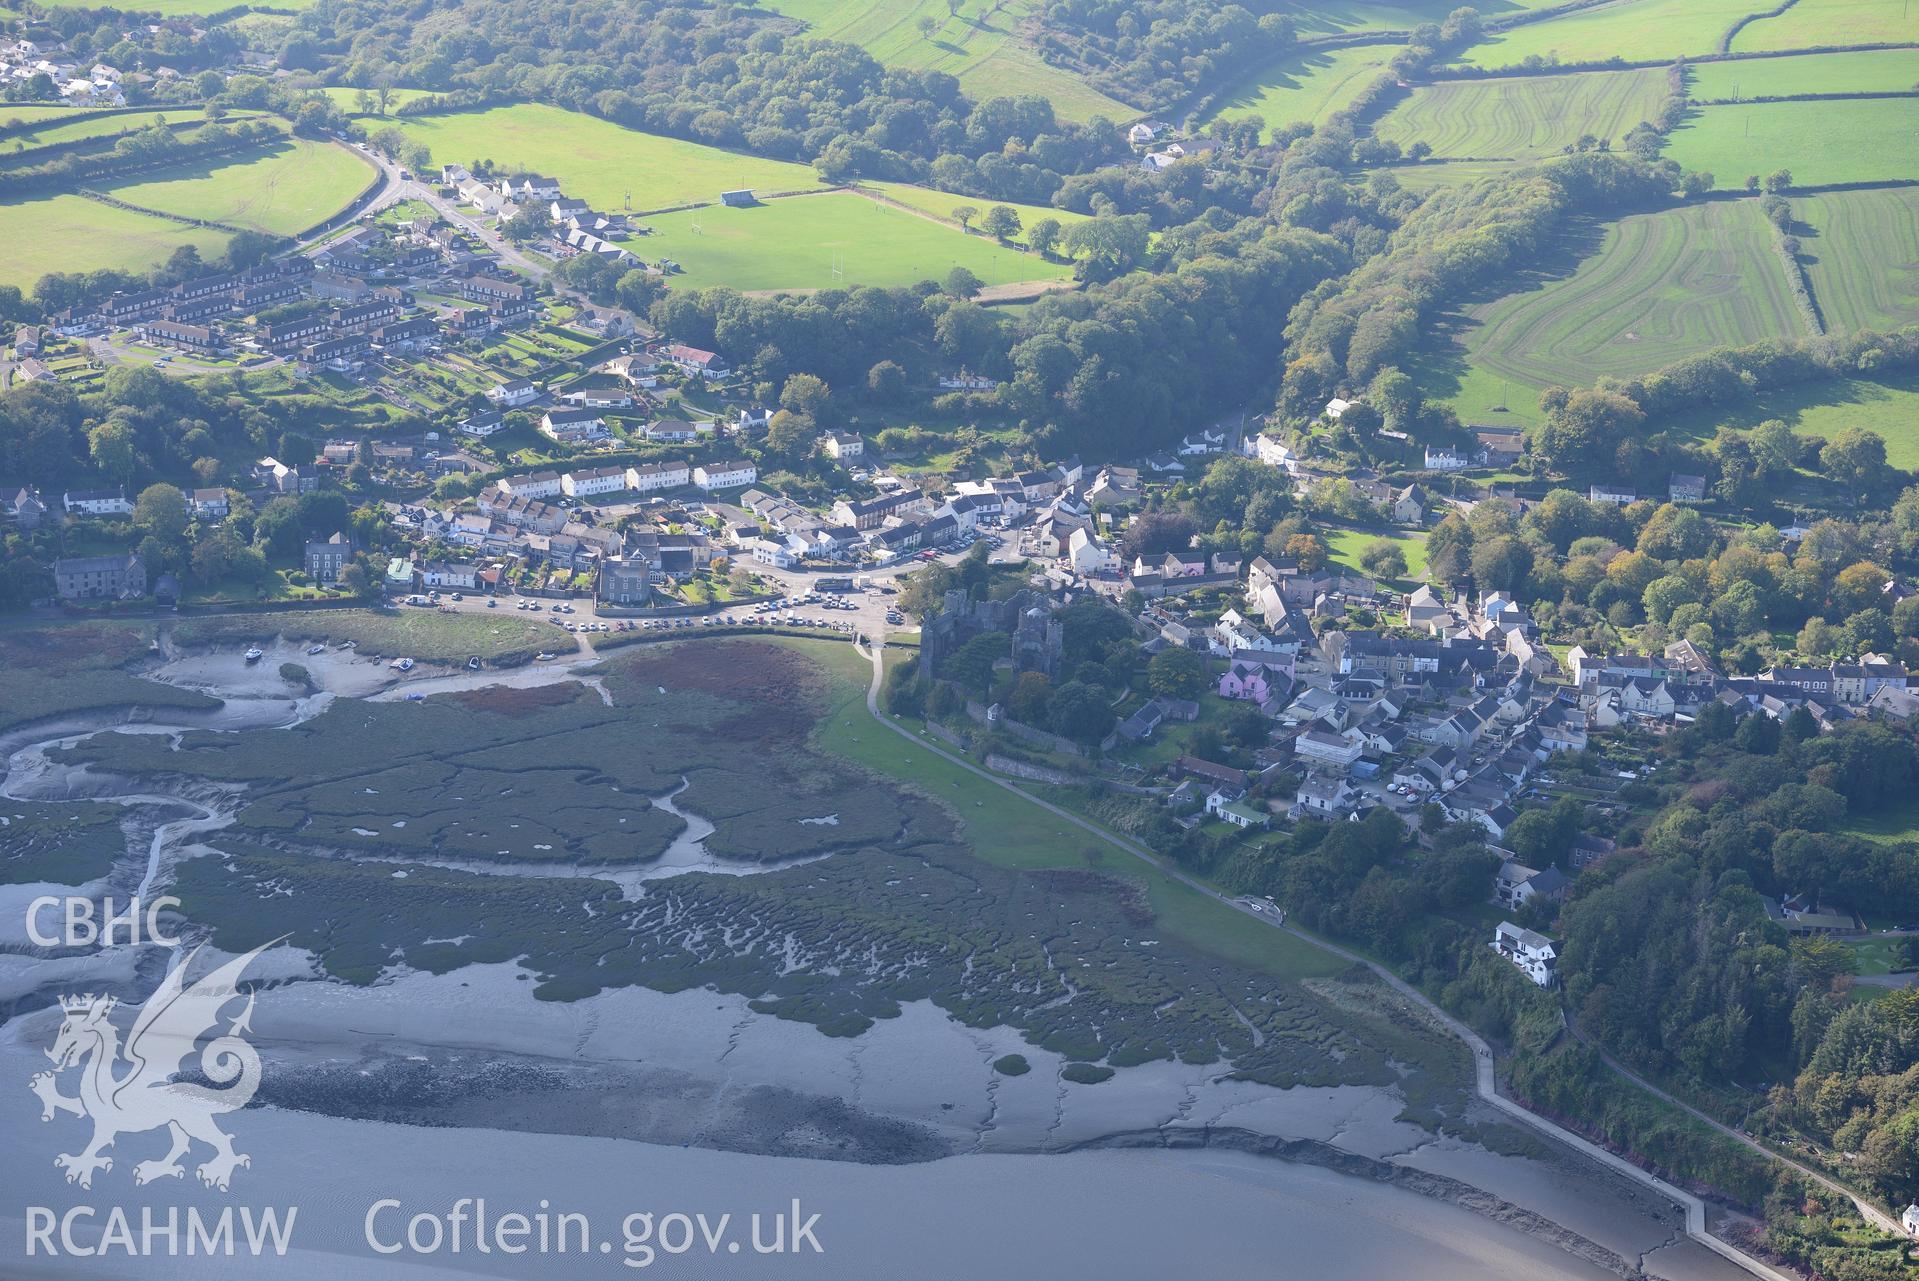 Laugharne Castle and the surrounding town. Oblique aerial photograph taken during Royal Commission's programme of archaeological aerial reconnaissance by Toby Driver on 30th September 2015.